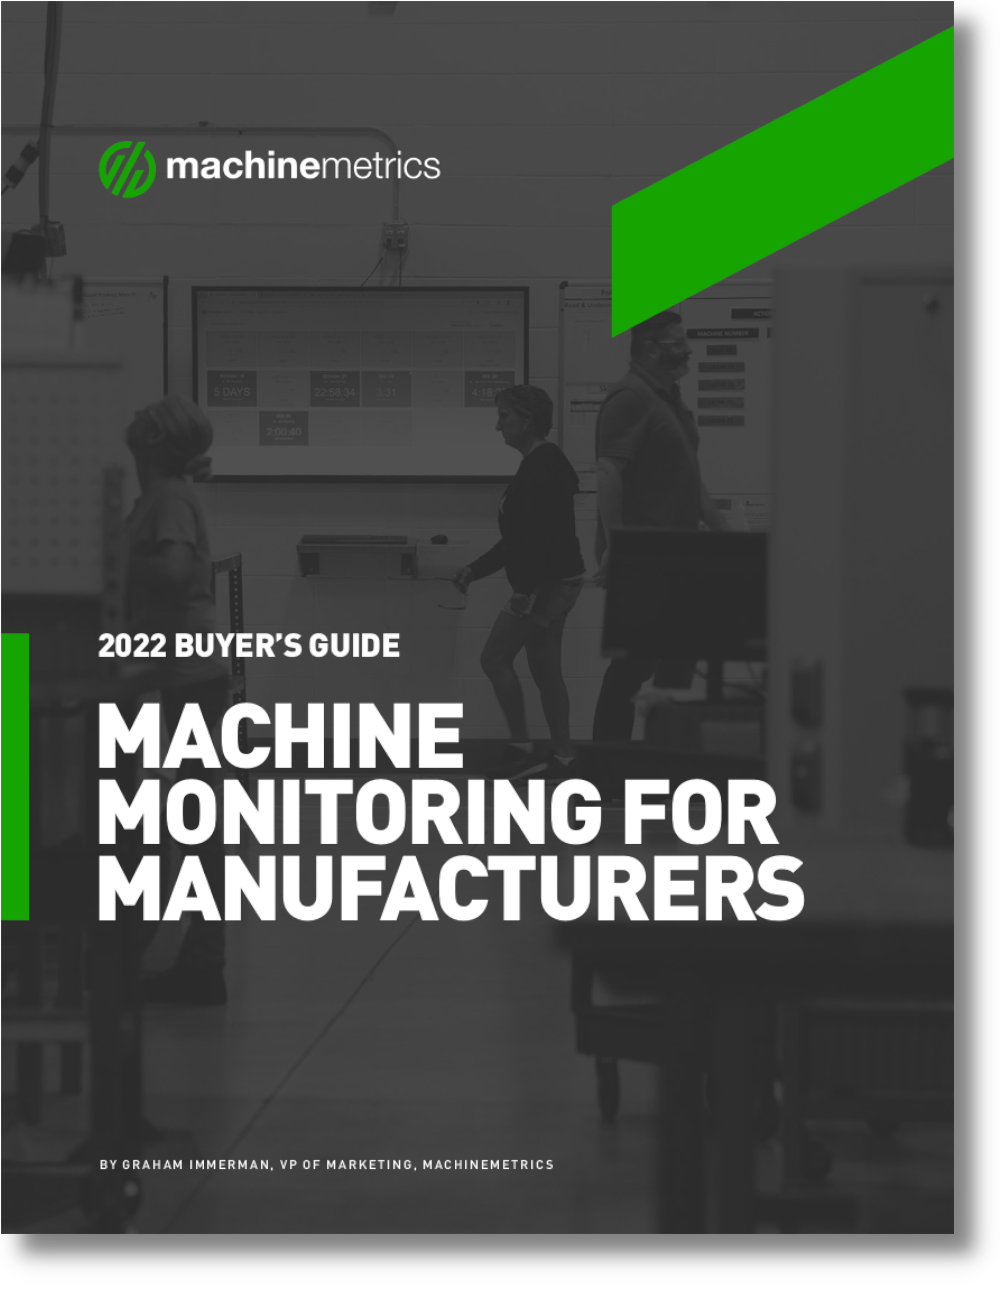 2022 Machine Monitoring Buyers Guide eBook cover.